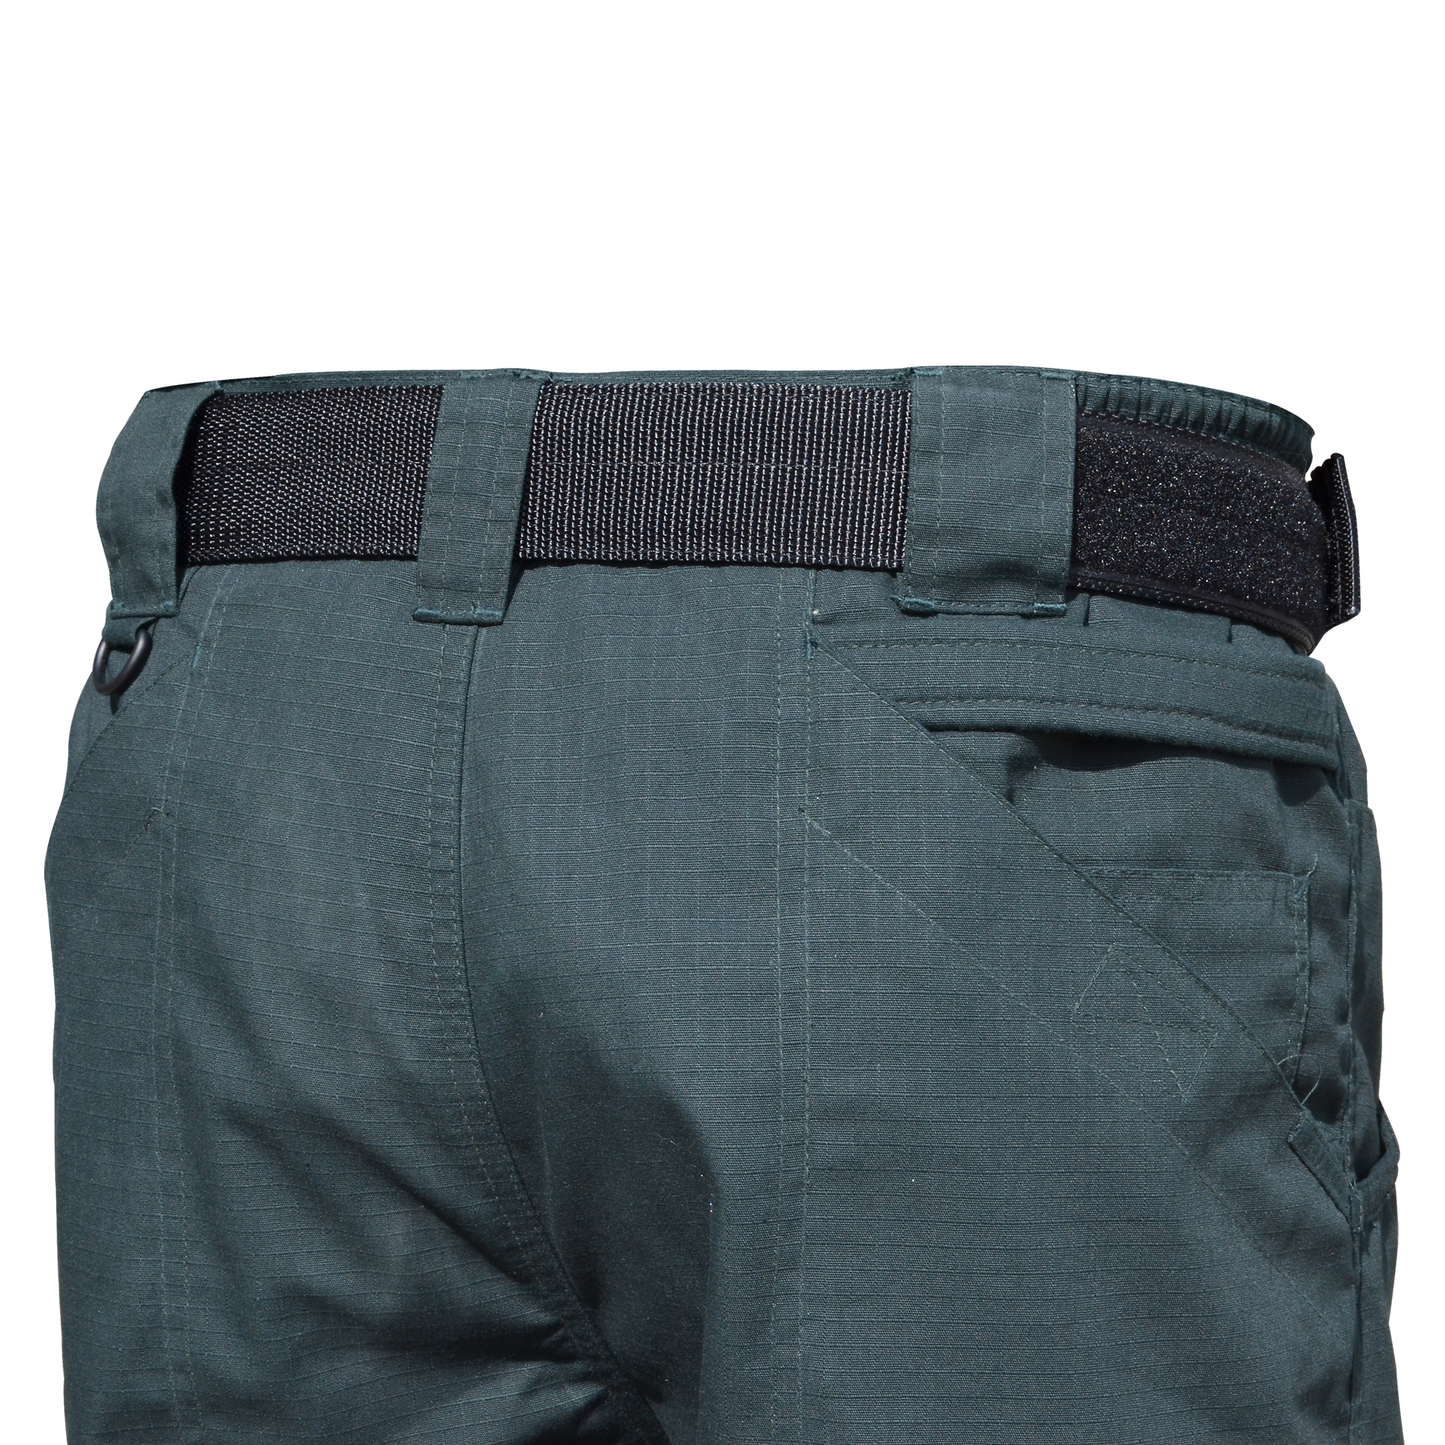 Niton Tactical RipStop EMS Trousers 30" Leg - Midnight Green